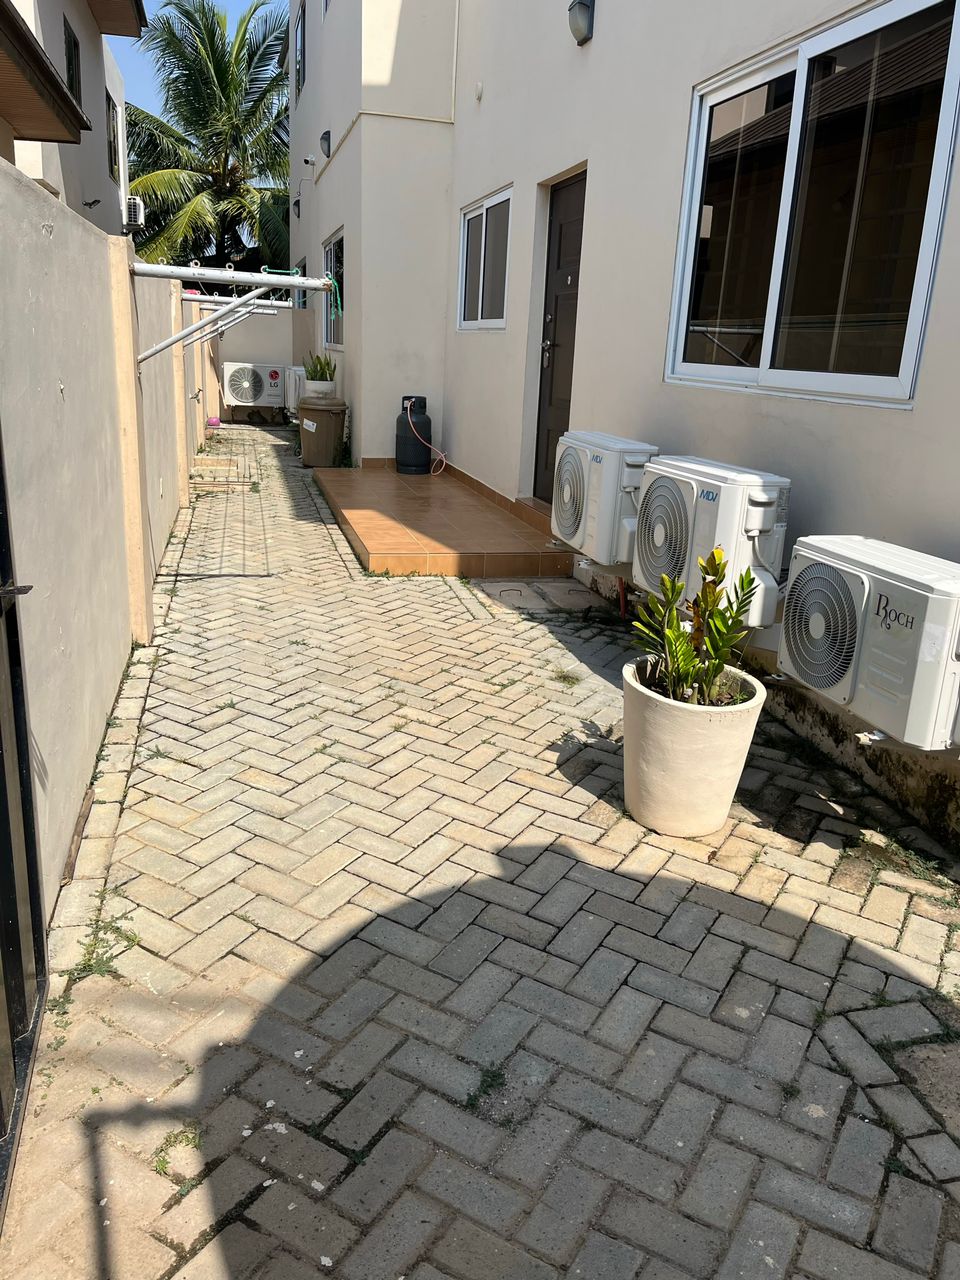 Five (5) Bedroom Furnished House for Rent at Tse Addo